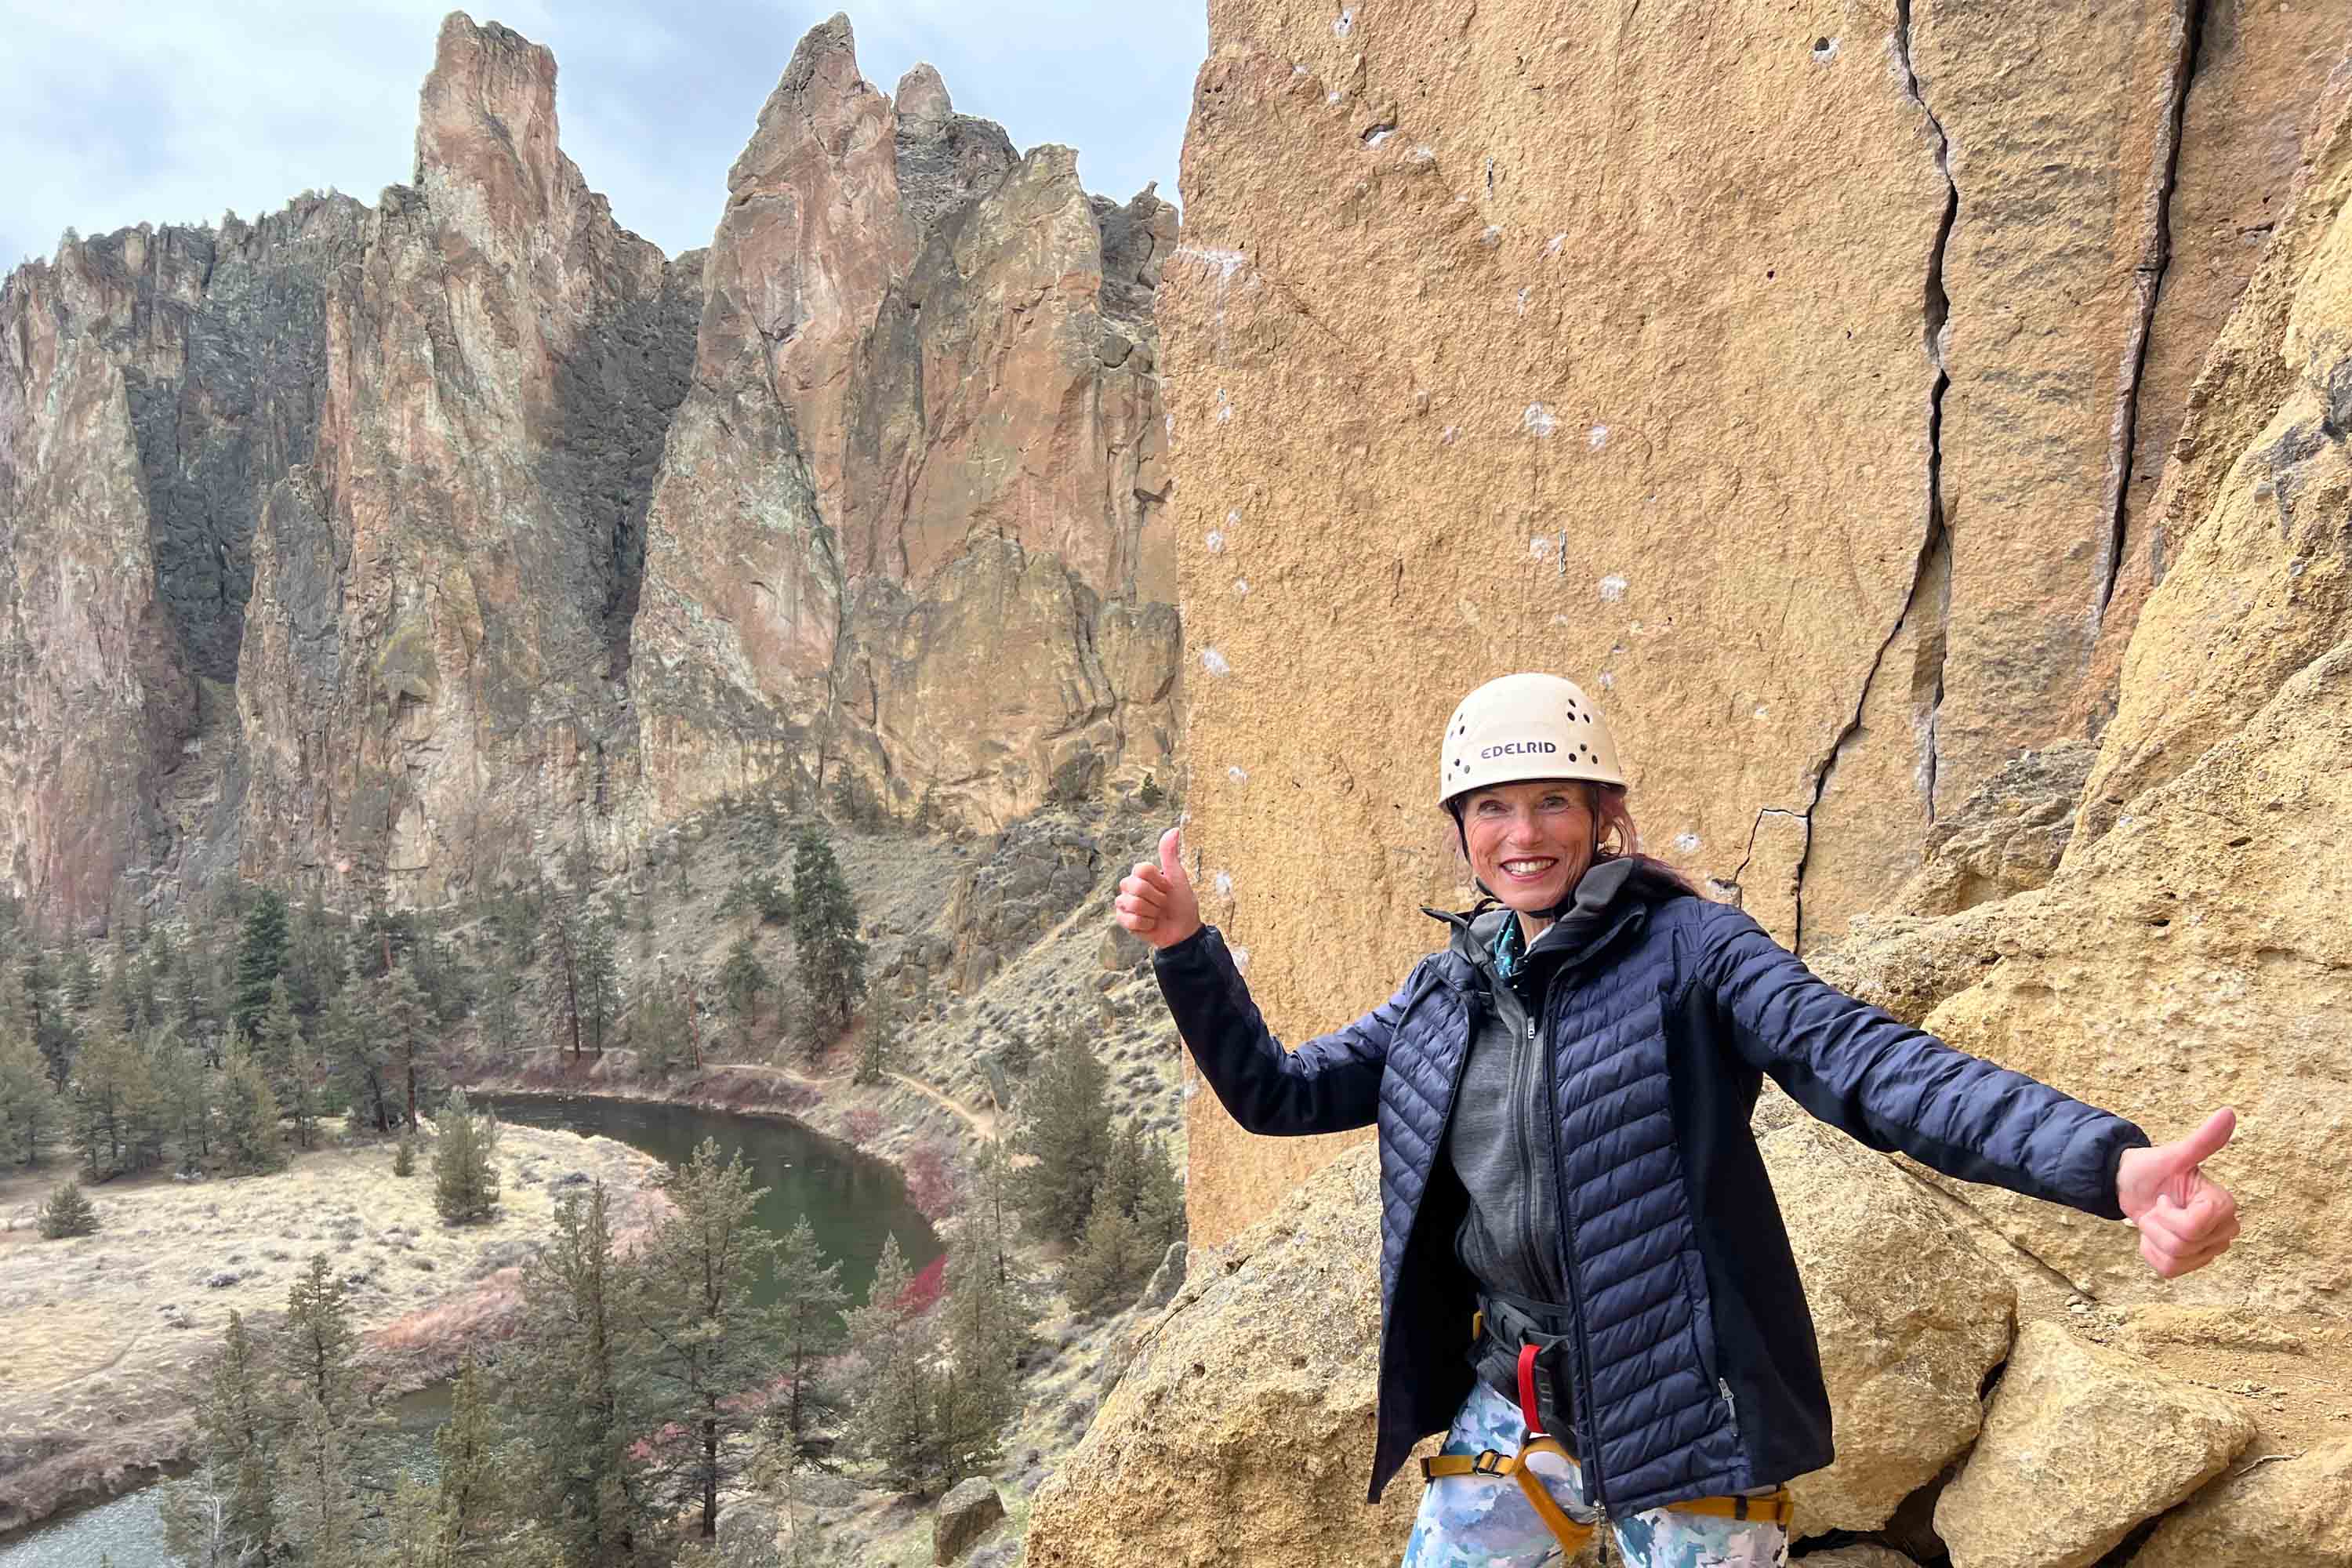 A woman flashes a thumbs up after climbing Smith Rock